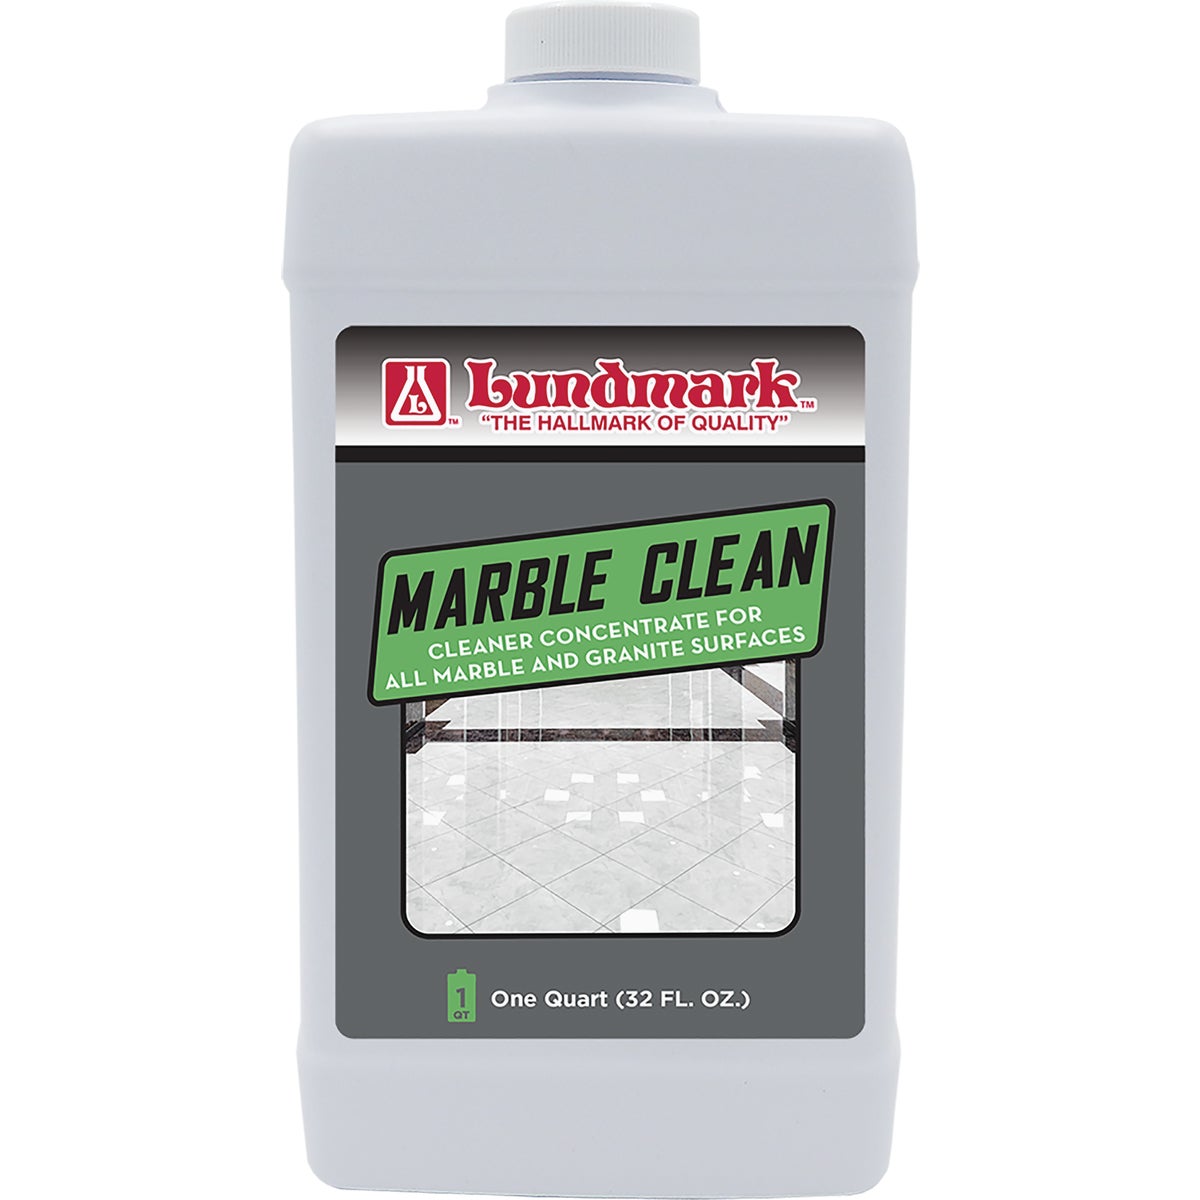 Item 602647, A carefully formulated marble and granite cleaner that is to be used on 